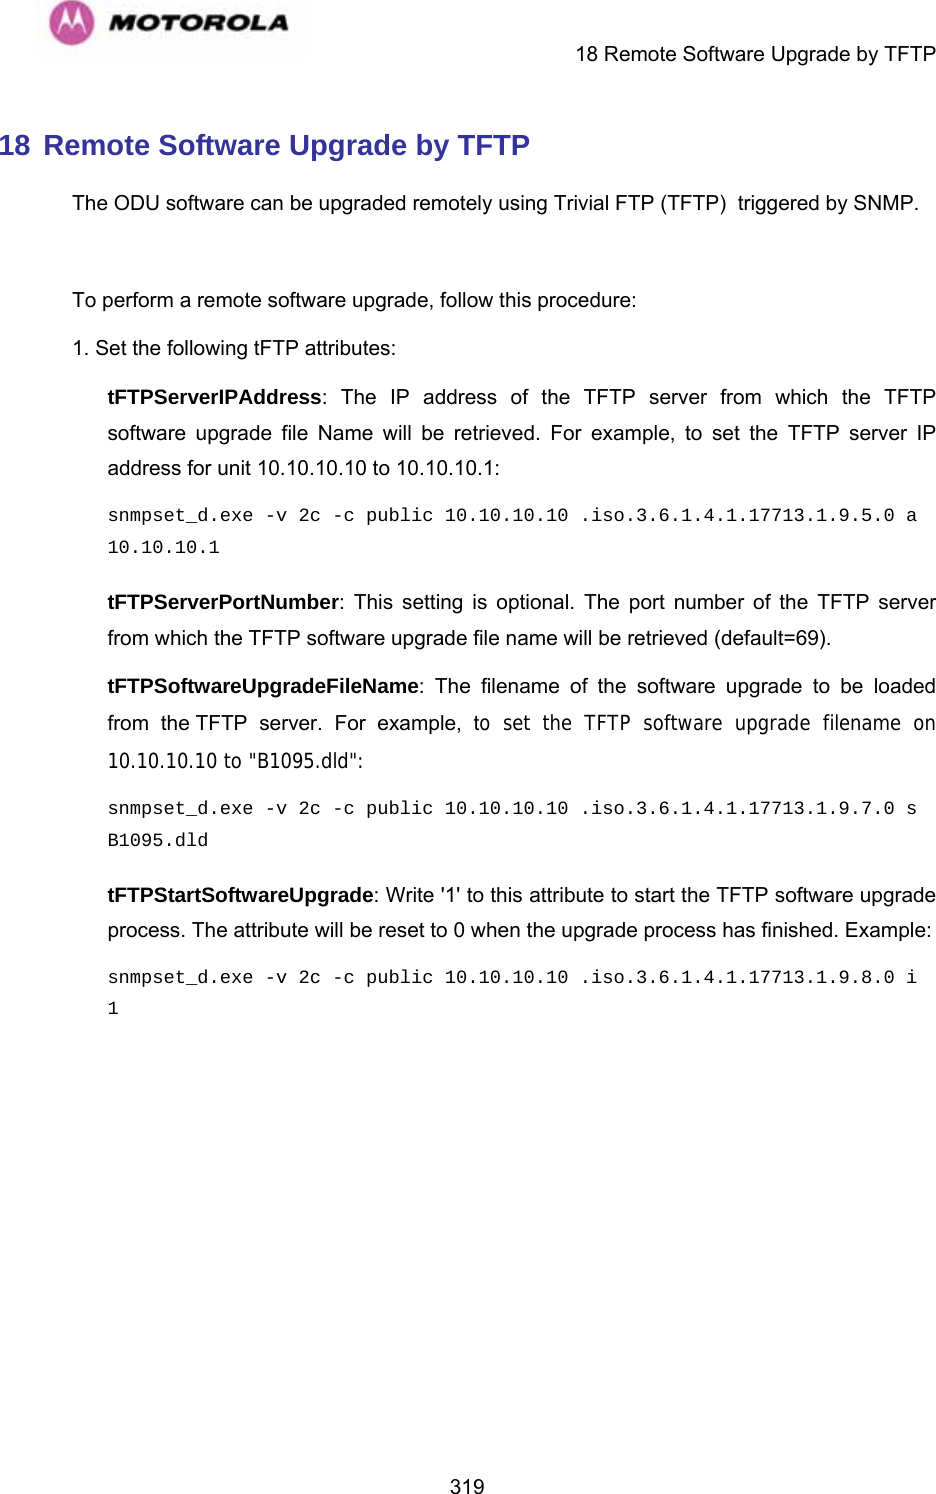     18 Remote Software Upgrade by TFTP  31918 Remote Software Upgrade by TFTP The ODU software can be upgraded remotely using Trivial FTP (TFTP)  triggered by SNMP.    To perform a remote software upgrade, follow this procedure: 1. Set the following tFTP attributes: tFTPServerIPAddress: The IP address of the TFTP server from which the TFTP software upgrade file Name will be retrieved. For example, to set the TFTP server IP address for unit 10.10.10.10 to 10.10.10.1: snmpset_d.exe -v 2c -c public 10.10.10.10 .iso.3.6.1.4.1.17713.1.9.5.0 a 10.10.10.1 tFTPServerPortNumber: This setting is optional. The port number of the TFTP server from which the TFTP software upgrade file name will be retrieved (default=69). tFTPSoftwareUpgradeFileName: The filename of the software upgrade to be loaded from the TFTP server. For example, to set the TFTP software upgrade filename on 10.10.10.10 to &quot;B1095.dld&quot;: snmpset_d.exe -v 2c -c public 10.10.10.10 .iso.3.6.1.4.1.17713.1.9.7.0 s B1095.dld tFTPStartSoftwareUpgrade: Write &apos;1&apos; to this attribute to start the TFTP software upgrade process. The attribute will be reset to 0 when the upgrade process has finished. Example: snmpset_d.exe -v 2c -c public 10.10.10.10 .iso.3.6.1.4.1.17713.1.9.8.0 i 1   